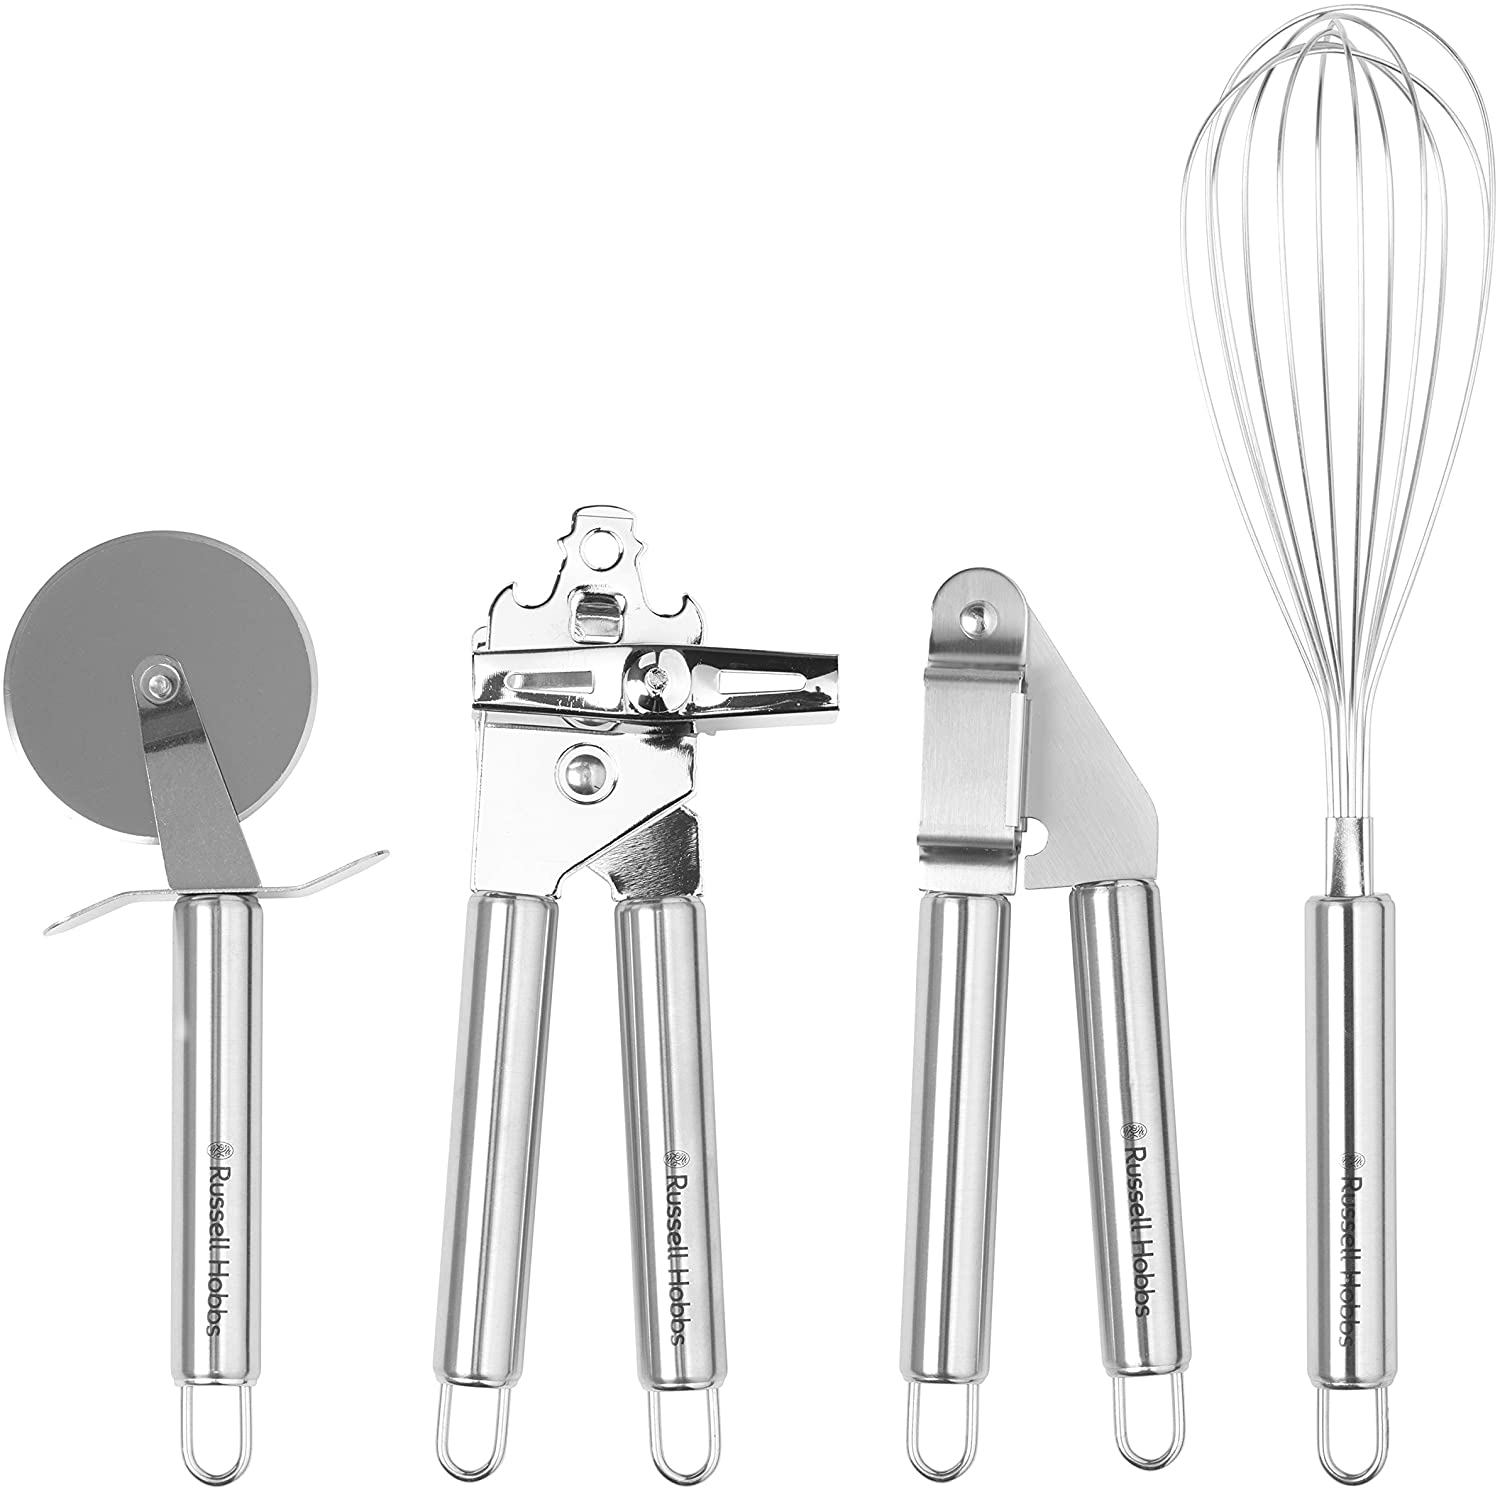 Russell Hobbs 4 Piece Stainless Steel Kitchen Tool Set Silver RH00124 Includes Pizza Cutter, Whisk, Garlic Press and Tin Opener, Stainless Steel